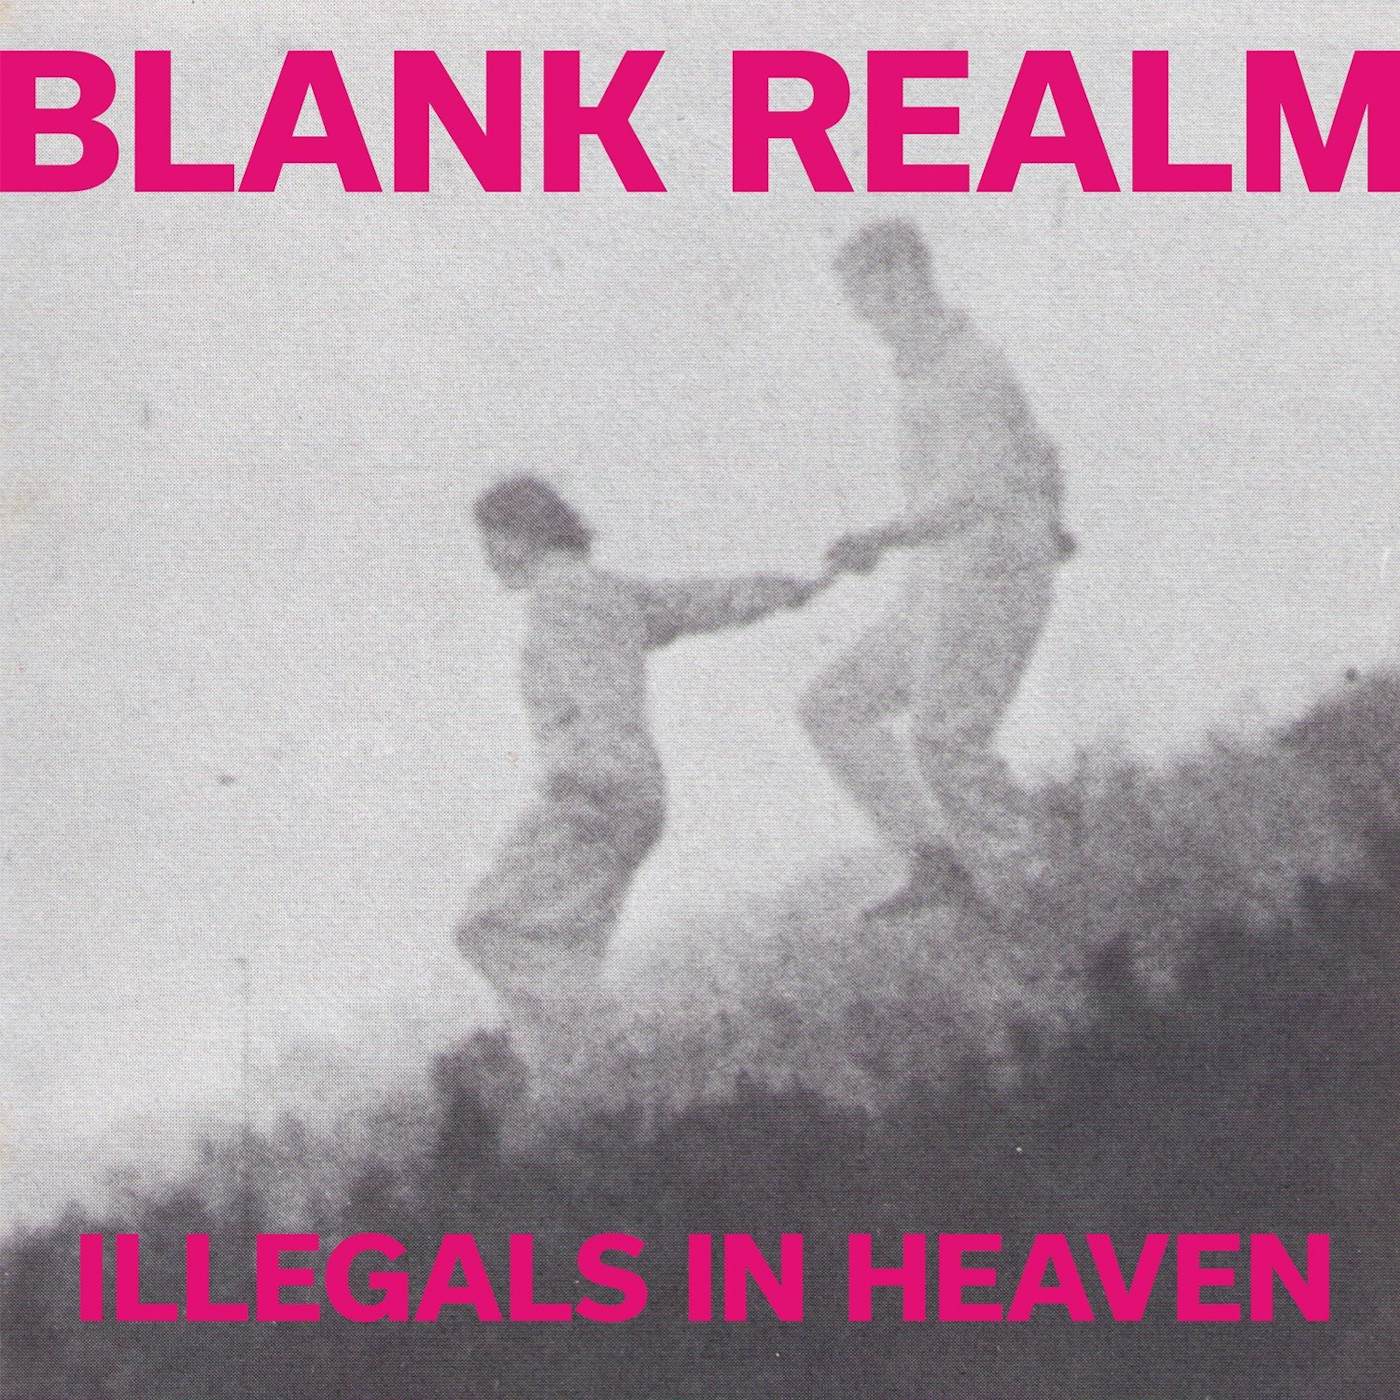 Blank Realm 'Illegals In Heaven' Vinyl Record